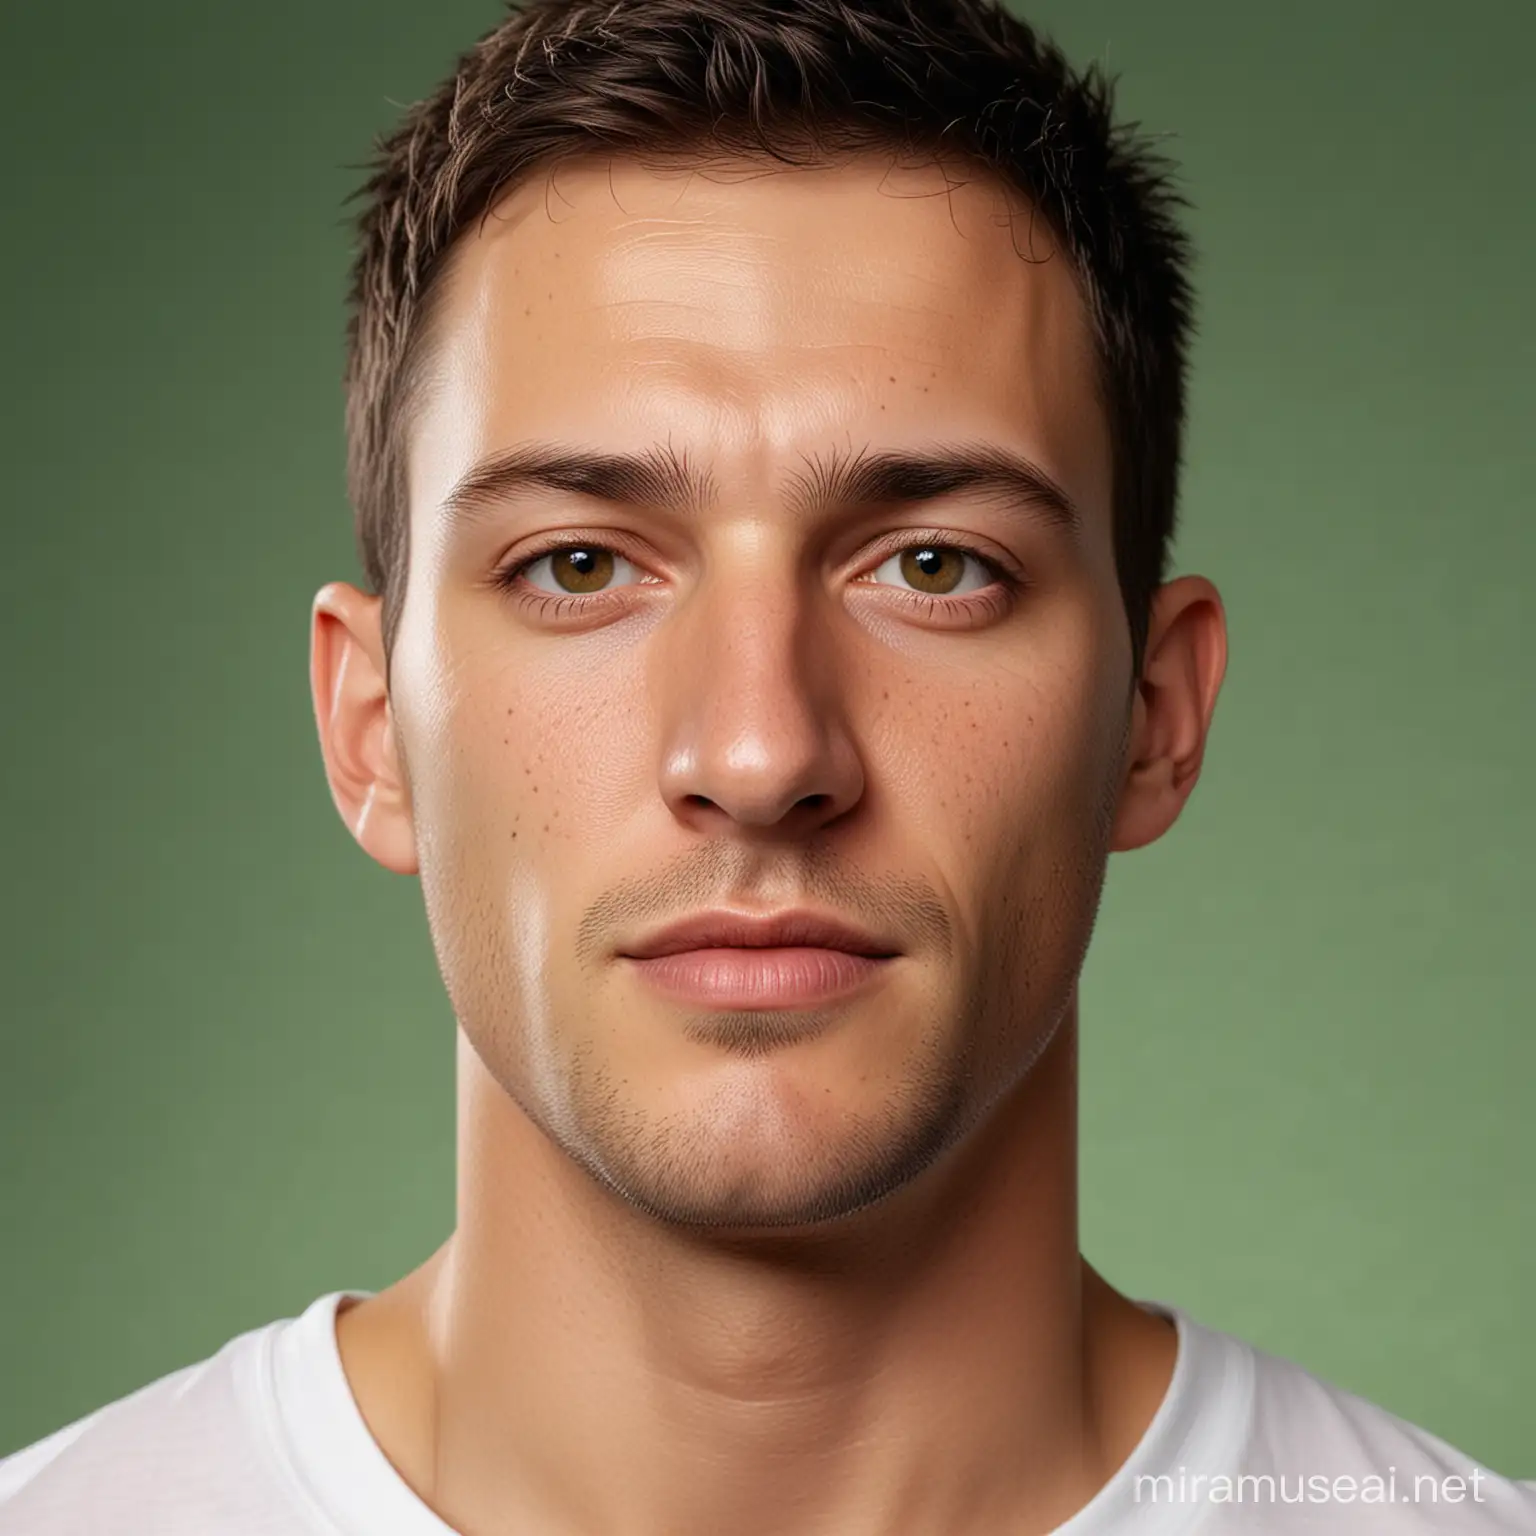 Ultra-realistic and detailed skin portrait photo of a man, European type. He's shaved. He has brown eyes. There is a green background behind him. He is wearing a white T-shirt.